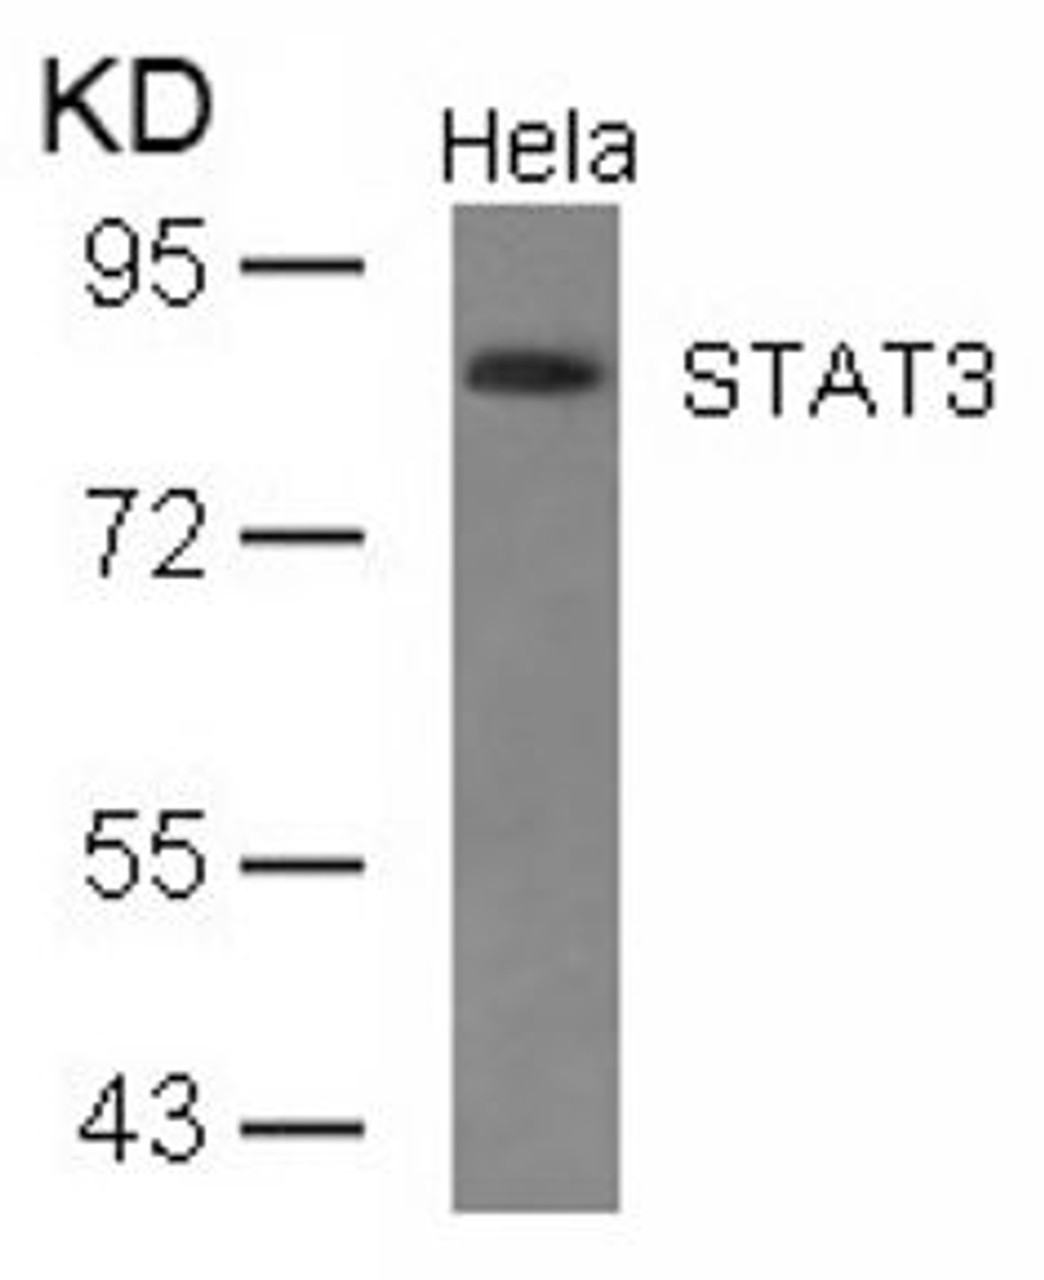 Western blot analysis of lysed extracts from HeLa cells using STAT3 (Ab-727) .